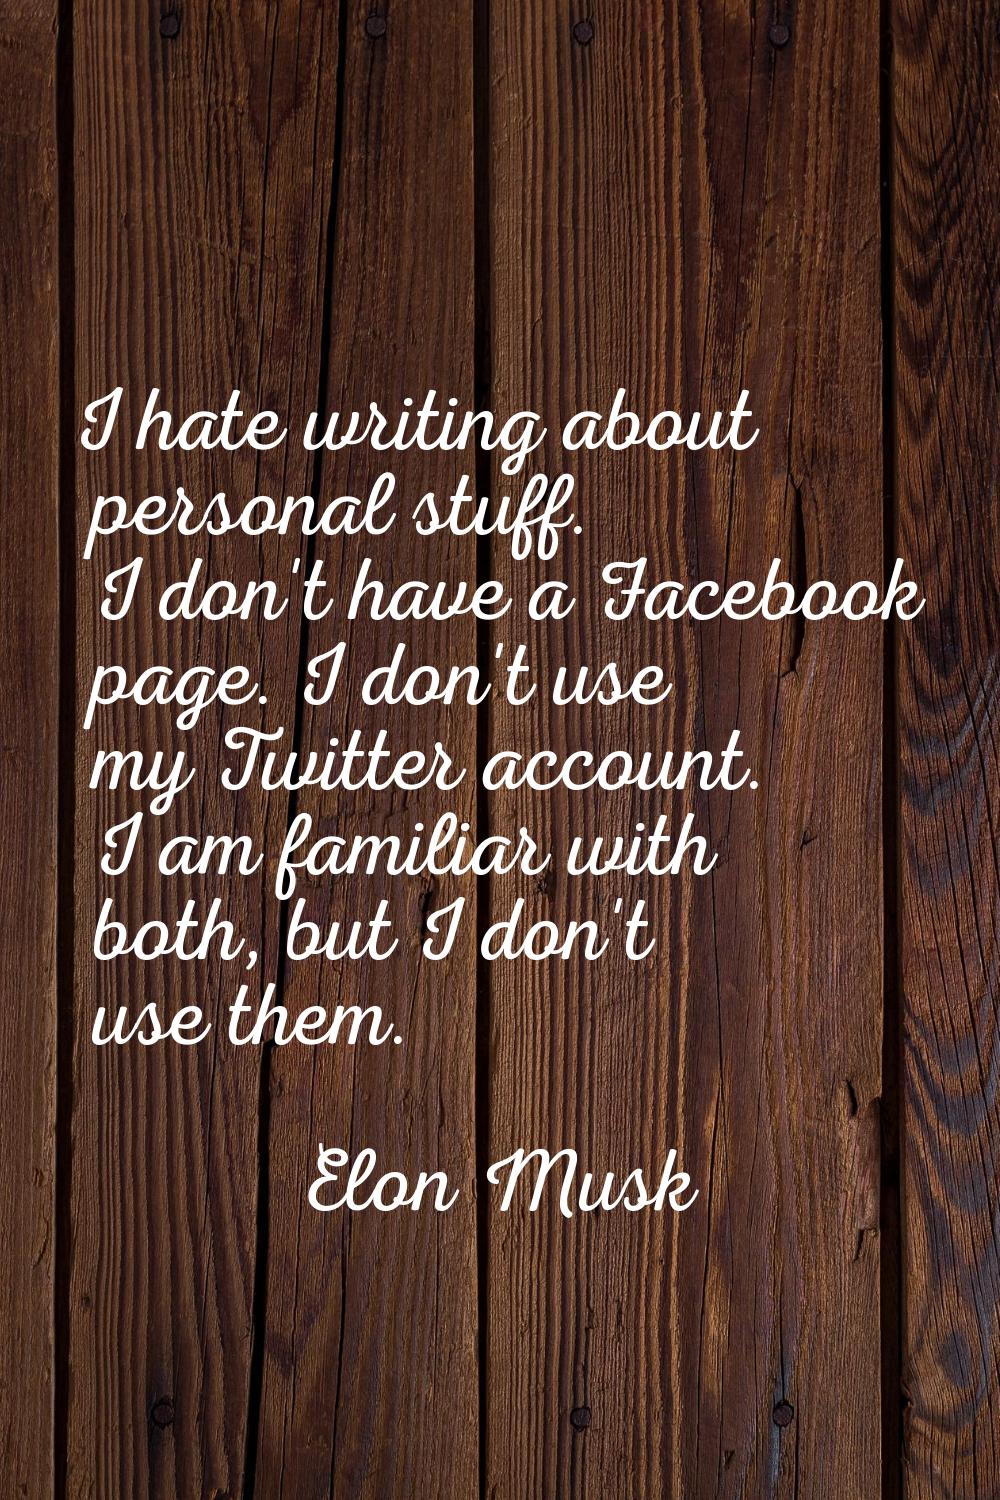 I hate writing about personal stuff. I don't have a Facebook page. I don't use my Twitter account. 